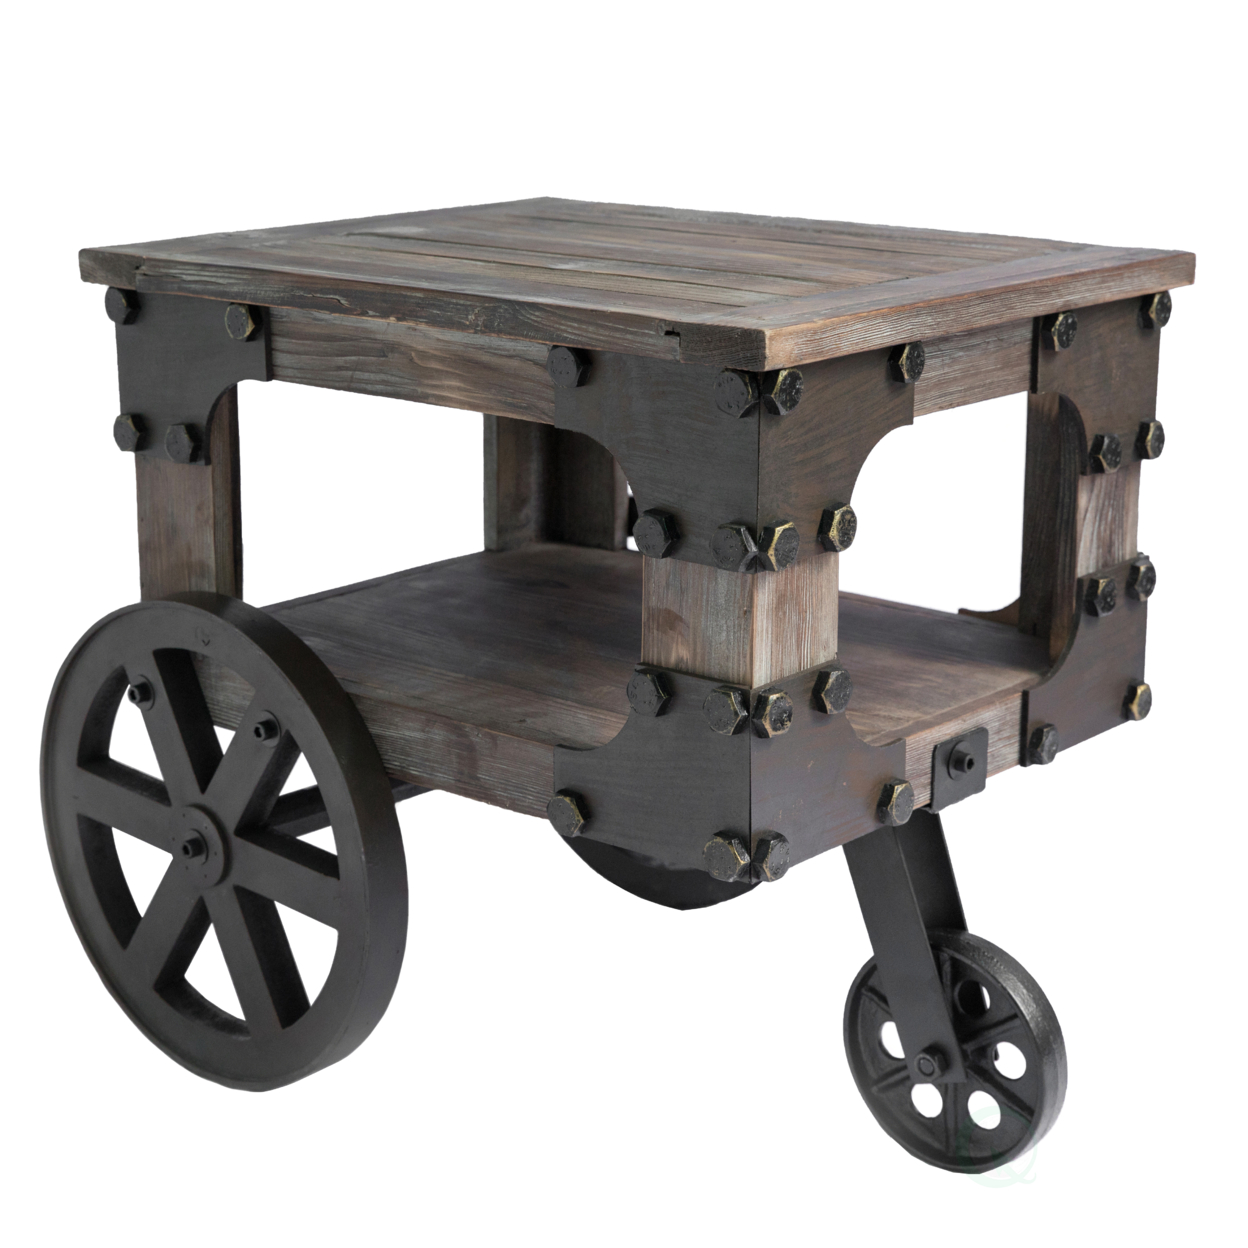 Industrial Wagon Style Small Rustic End Table With Storage Shelf And Wheels